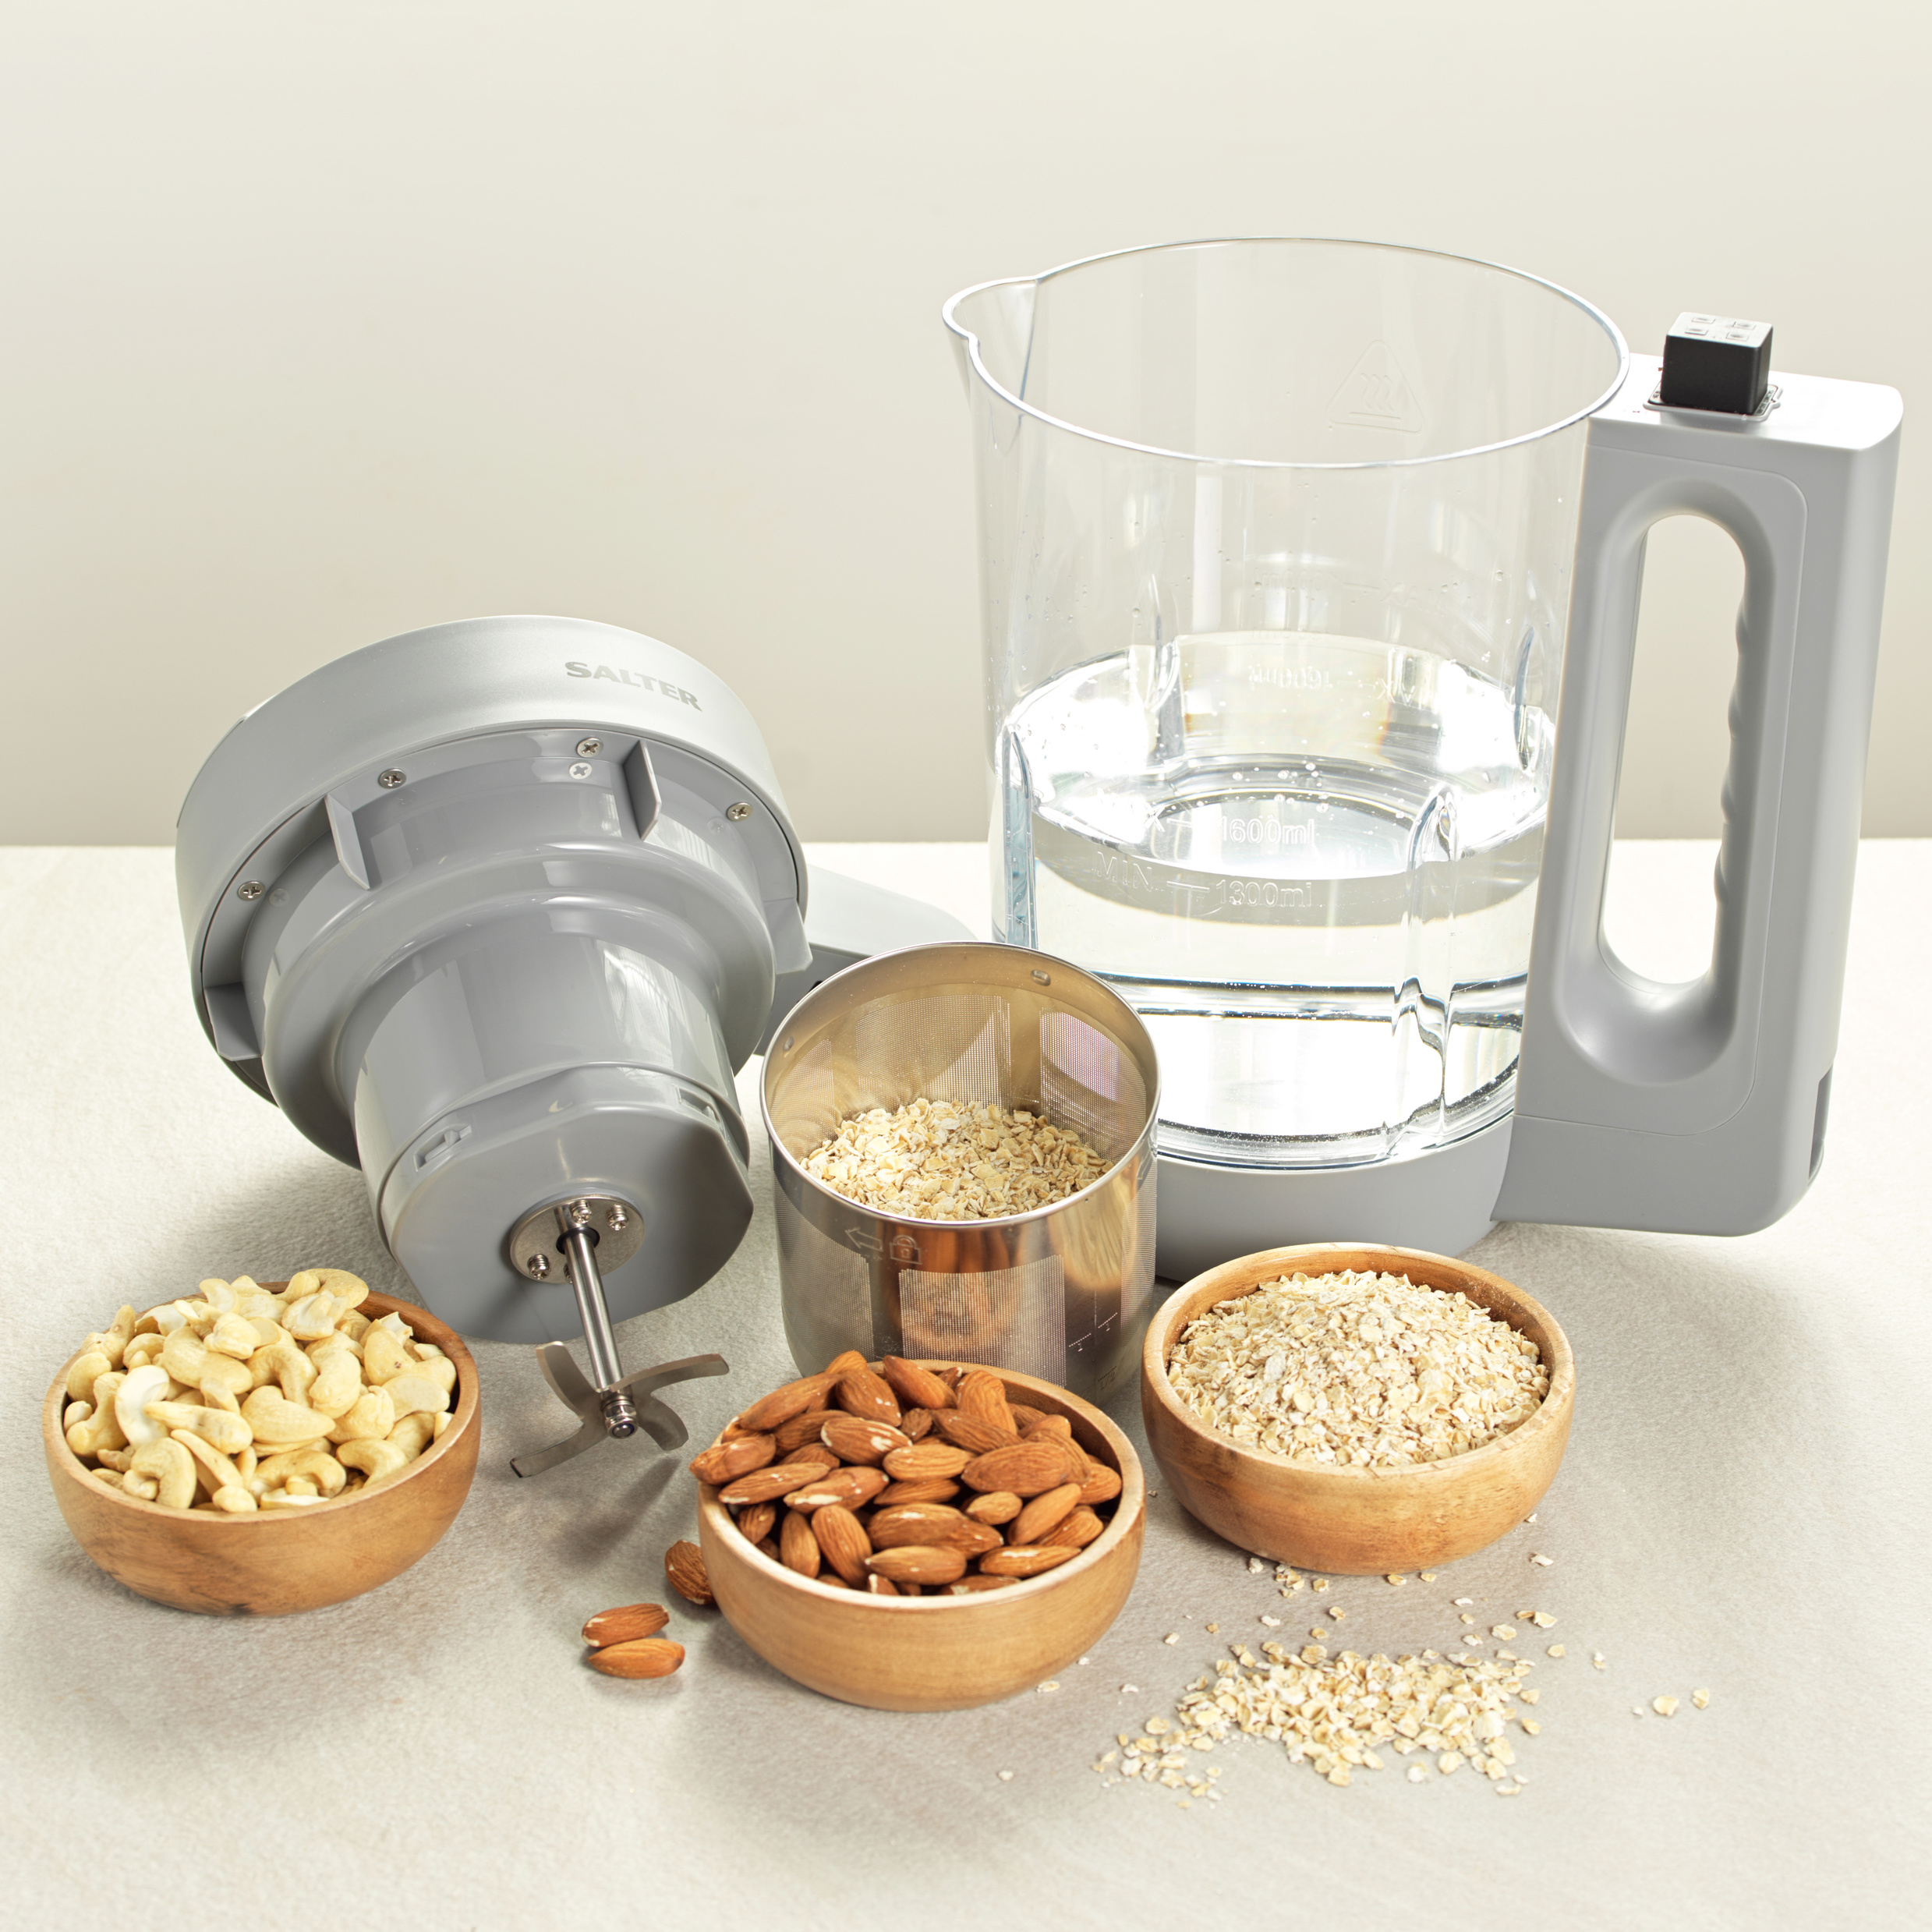 A plant milk maker with bowls of oats, nuts and almonds in front